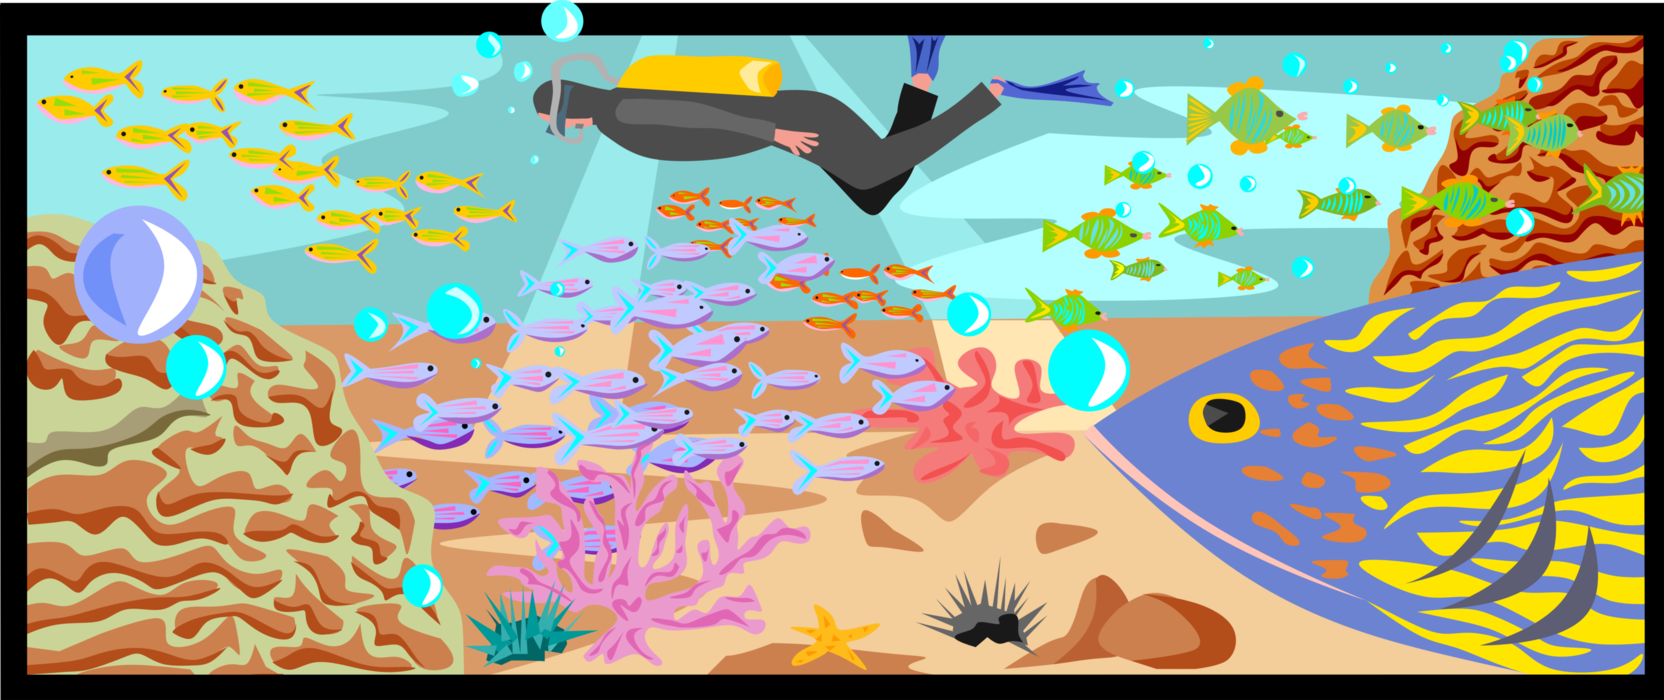 Vector Illustration of Scuba Diver Enjoys Diving with Schools of Tropical Fish at Underwater Coral Reef